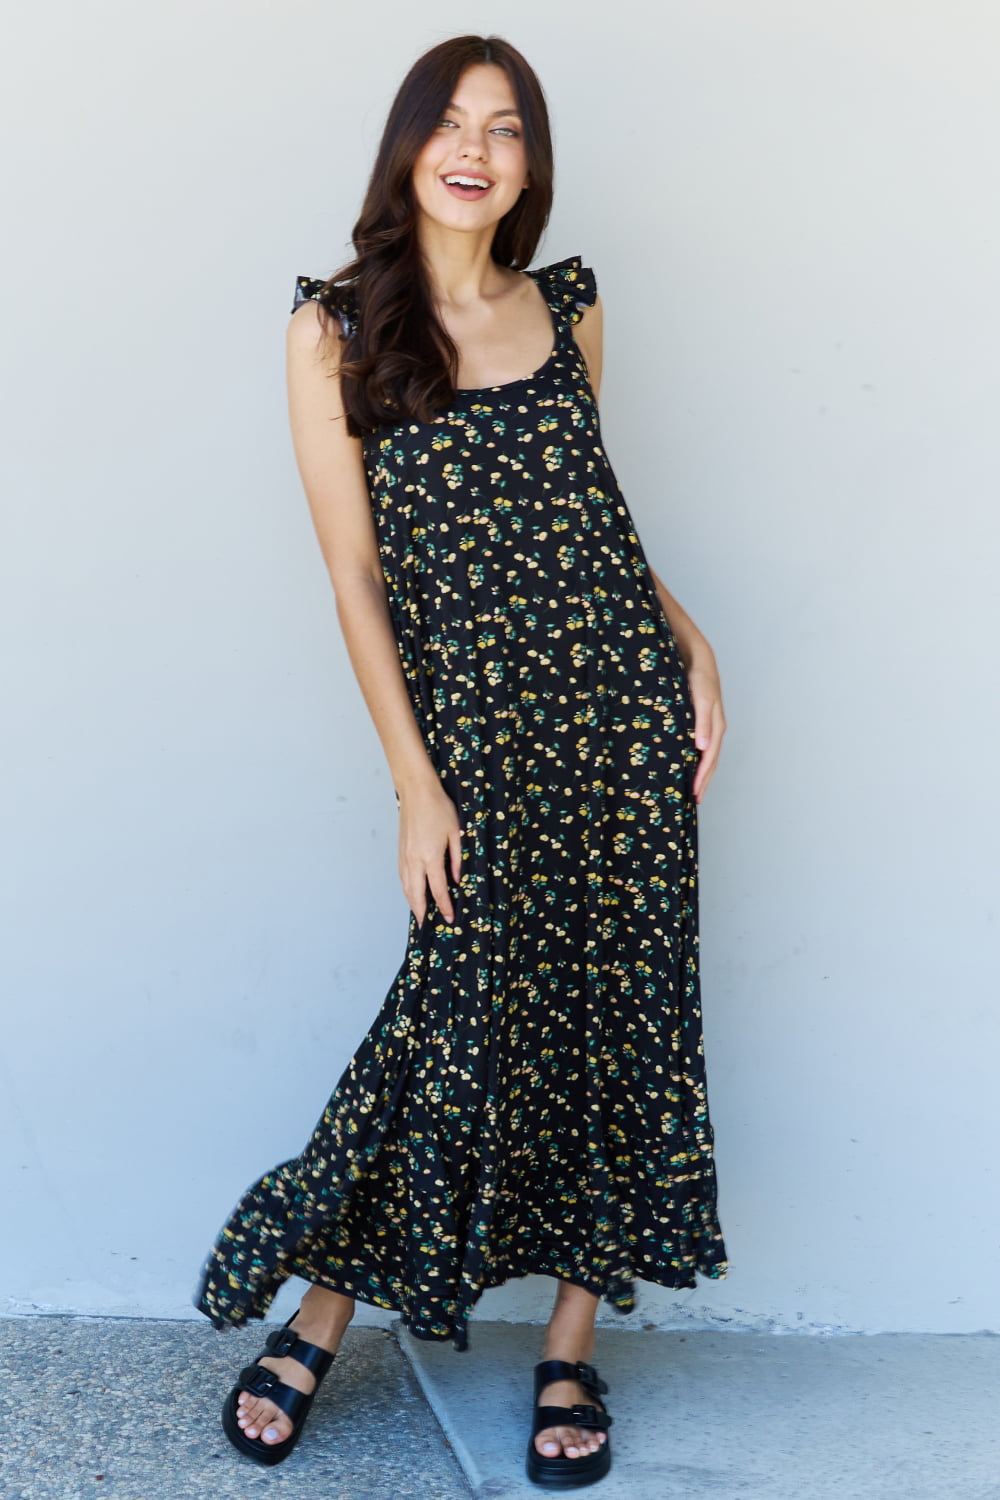 The Garden Ruffle Floral Maxi Dress in Black Yellow Floral - All Dresses - Dresses - 3 - 2024